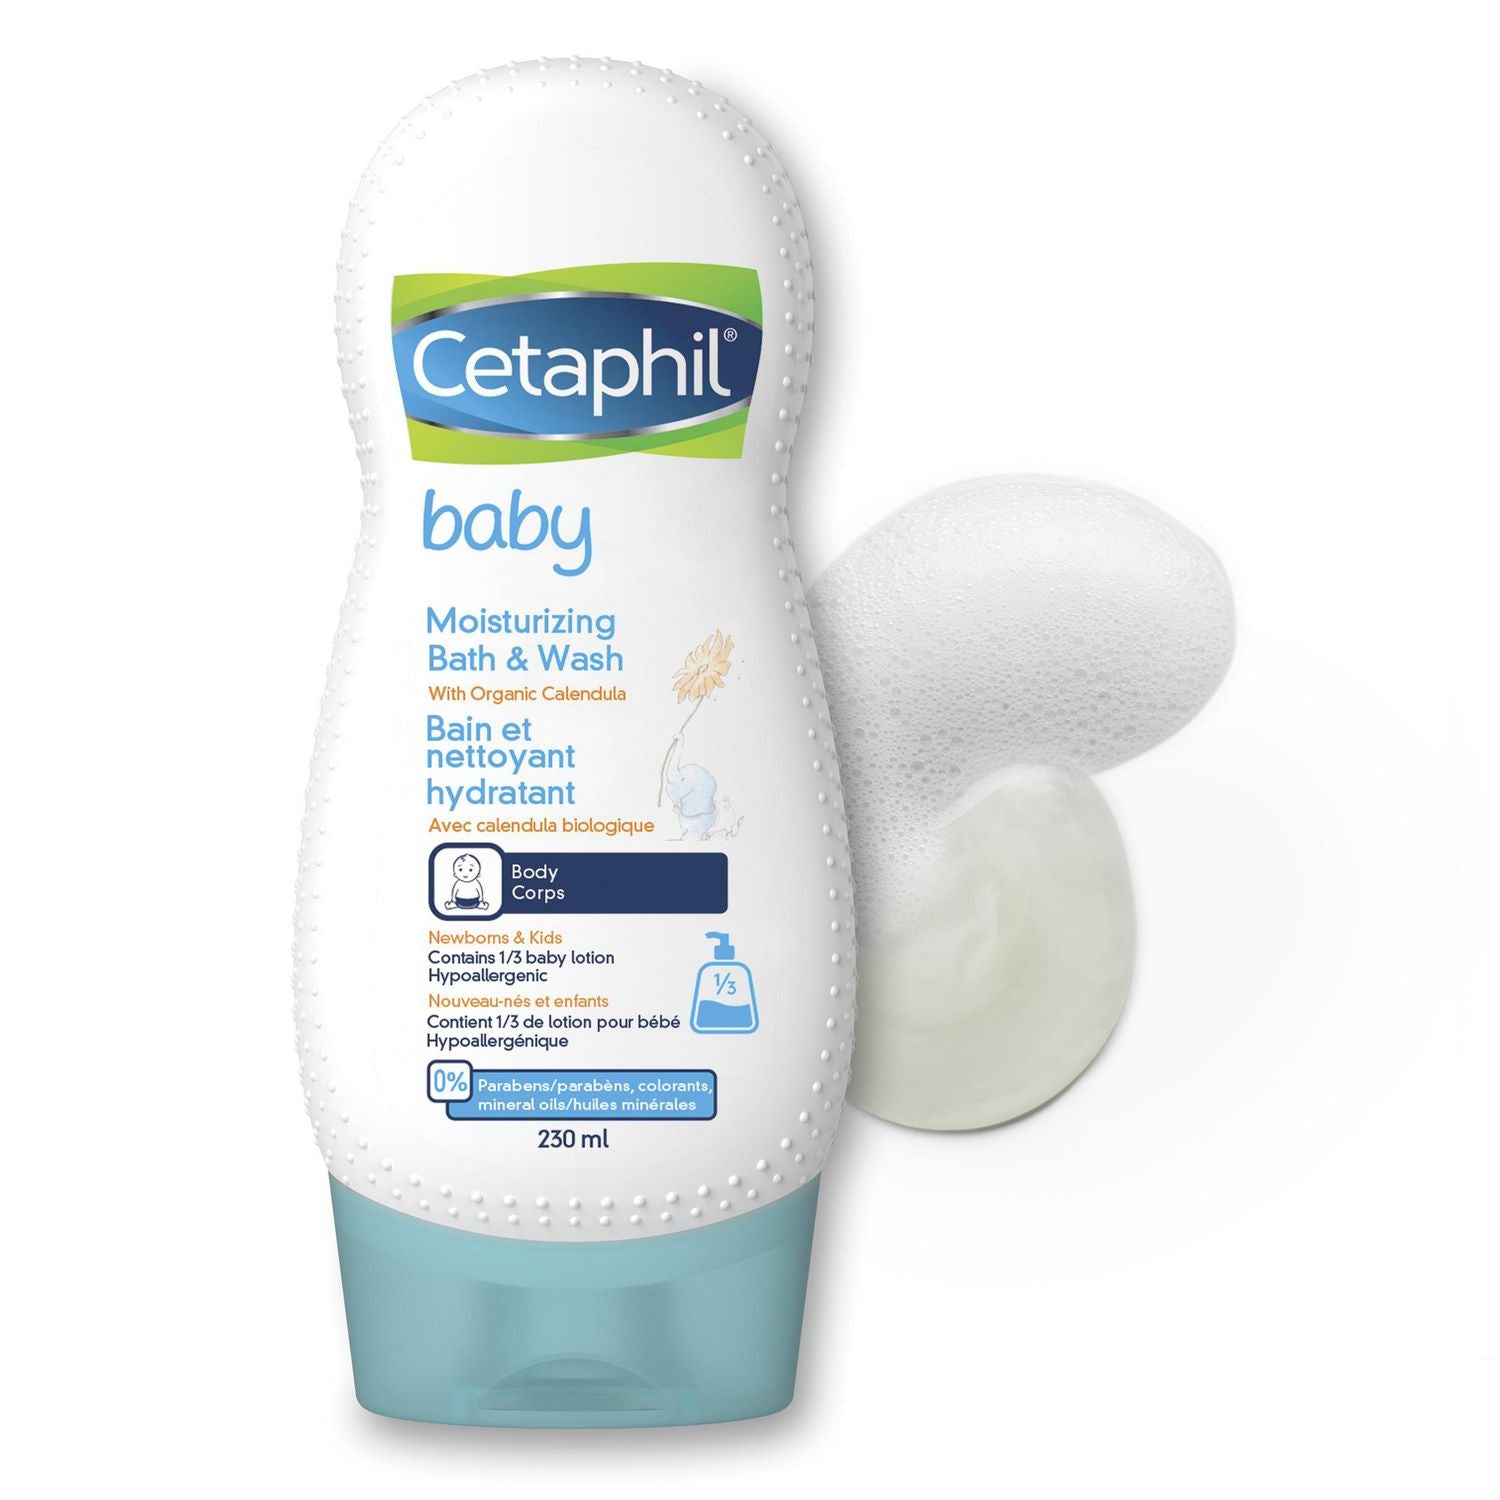 Cetaphil Baby Moisturizing Bath and Wash with Organic Calendula | Soothes Sensitive, Dry Skin | 230ml